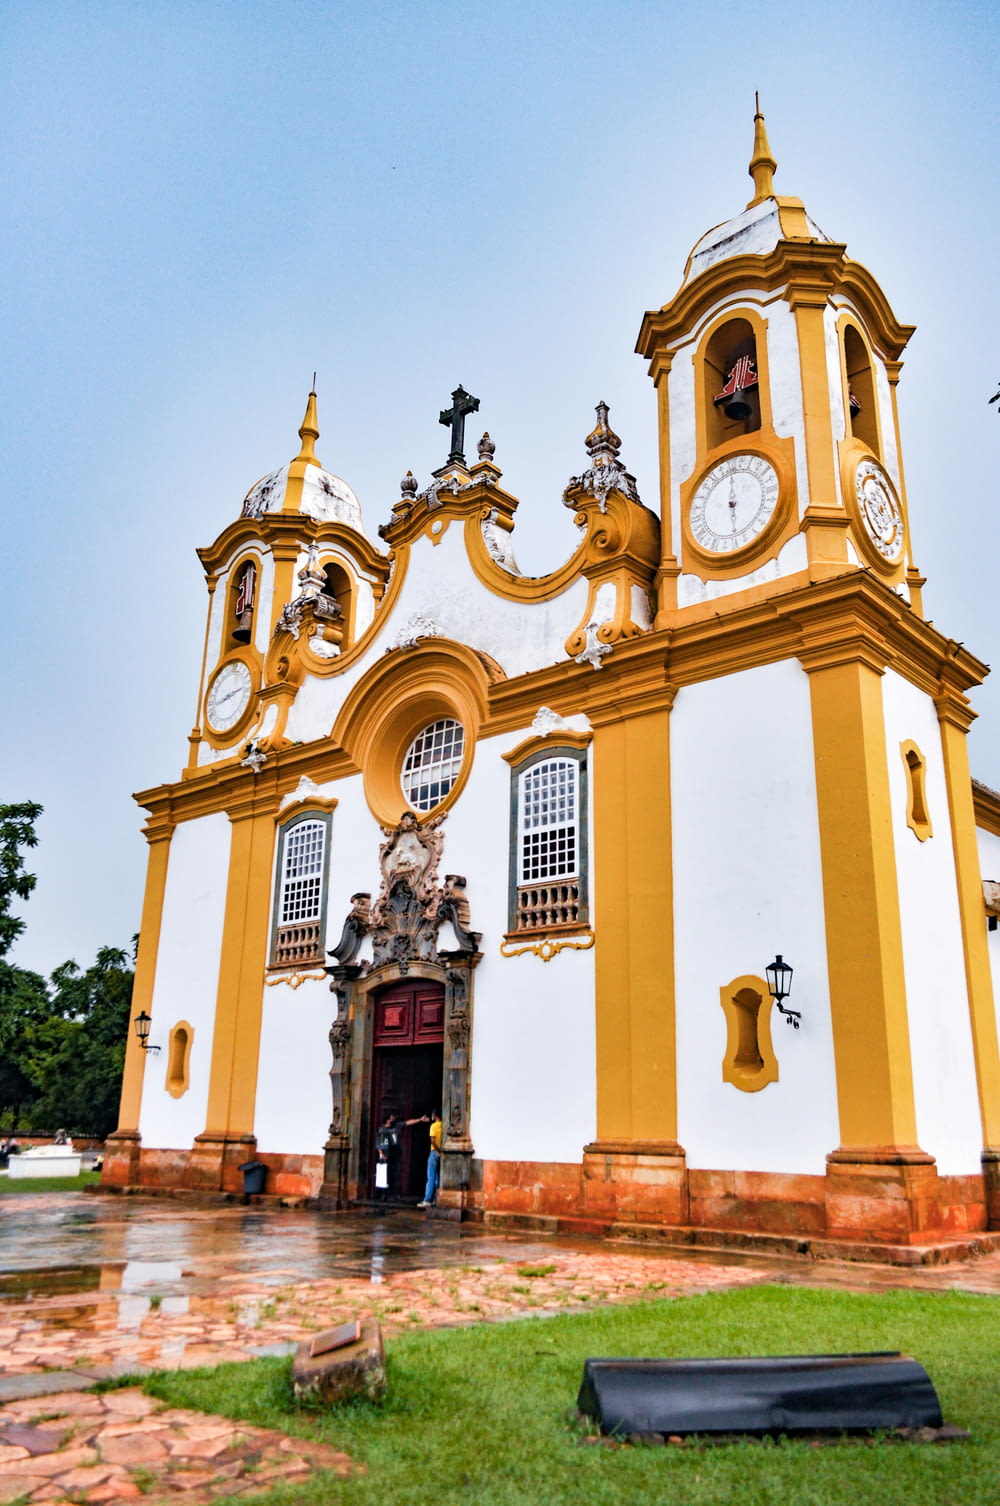 a yellow and white church with a clock tower